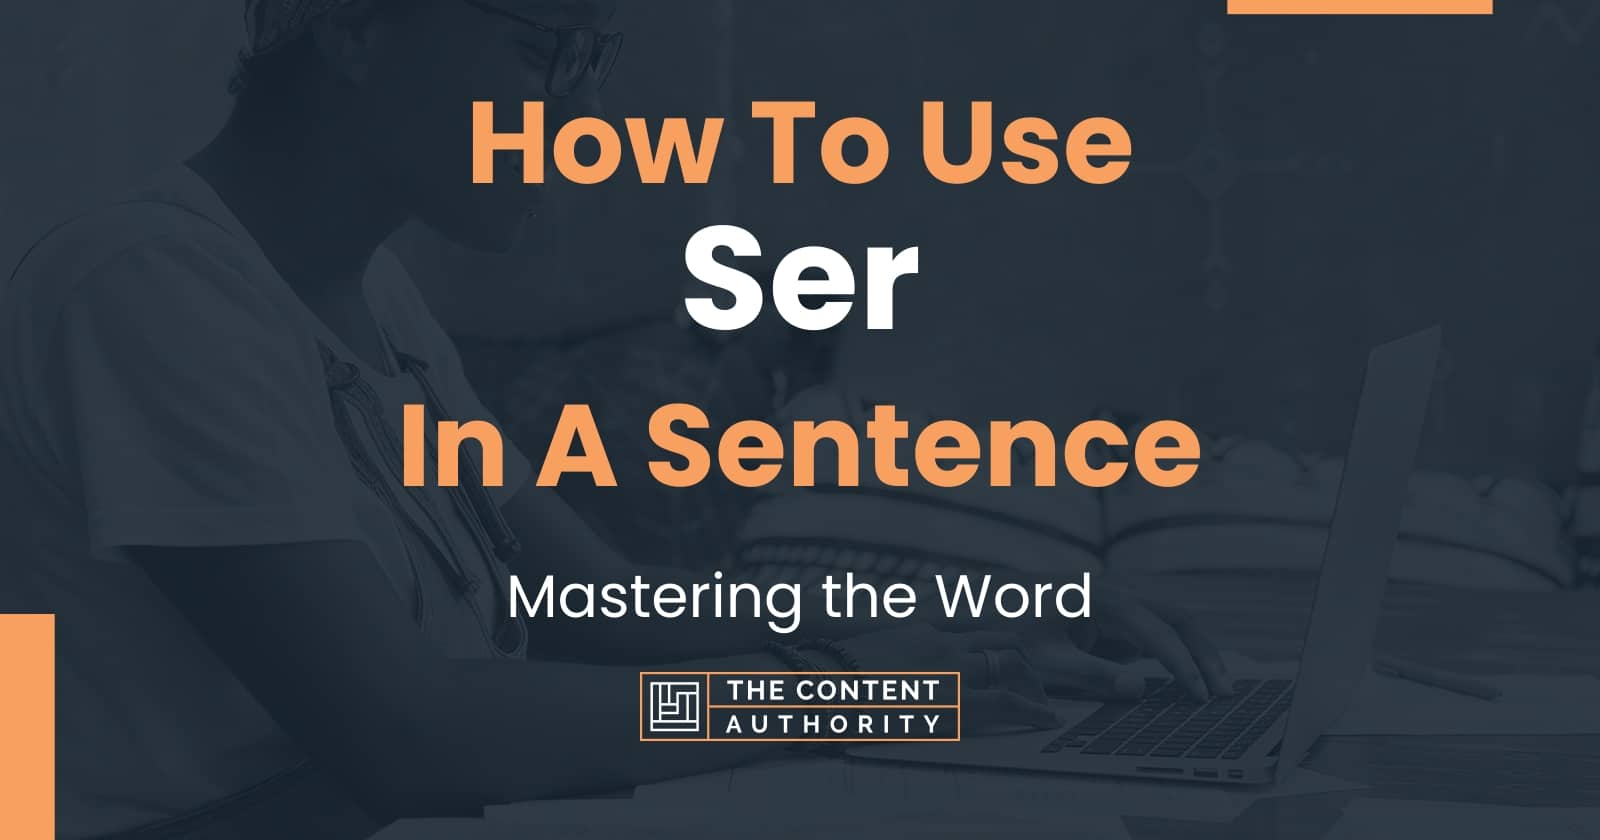 how-to-use-ser-in-a-sentence-mastering-the-word